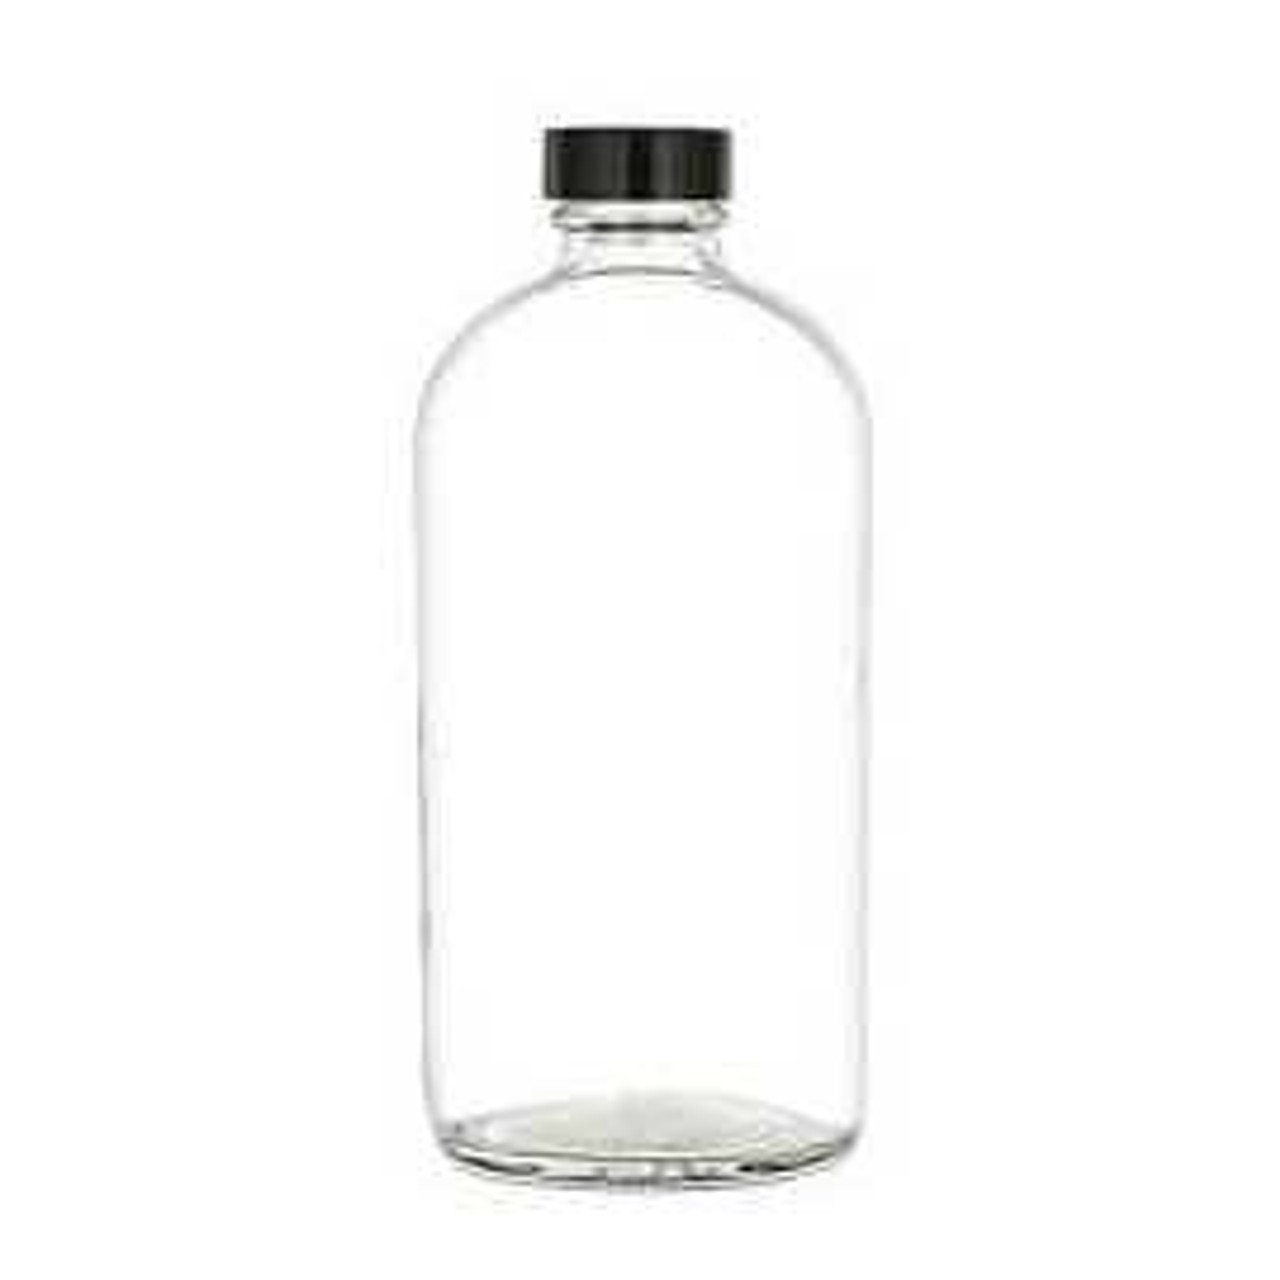 https://cdn11.bigcommerce.com/s-1ybtx/images/stencil/1280x1280/products/1047/6243/16-oz-Clear-Glass-Boston-Round-Bottle-with-White-Lotion-Pump_3156__22476.1674334853.jpg?c=2?imbypass=on